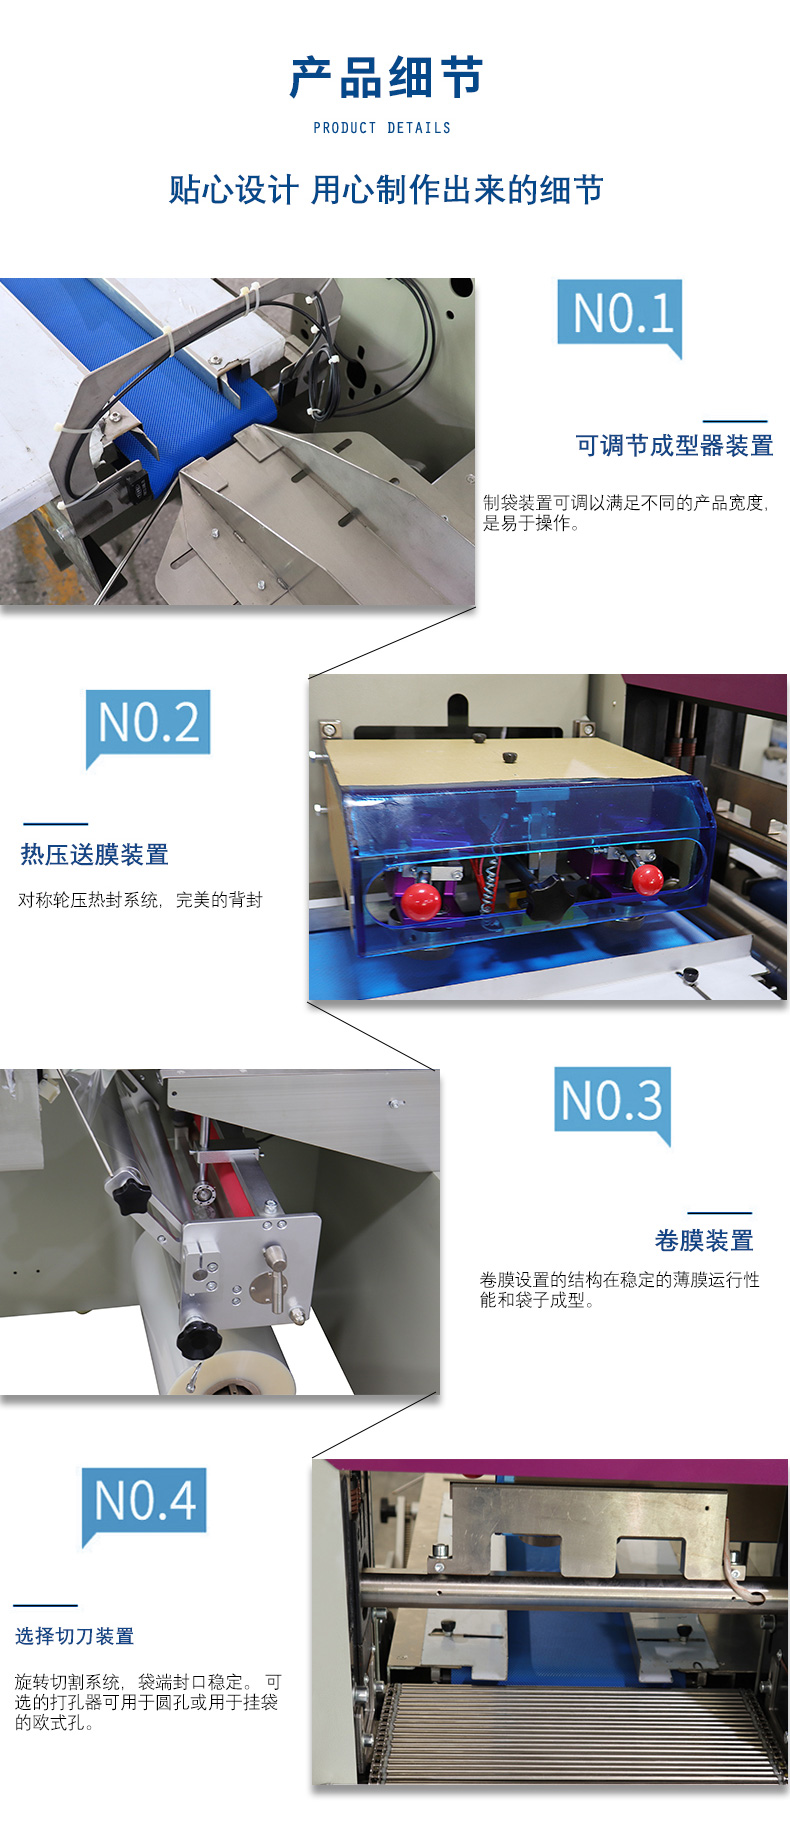 Multifunctional electric knife pen packaging machine Medical supplies Test pen packaging machinery Surgical instrument packaging equipment